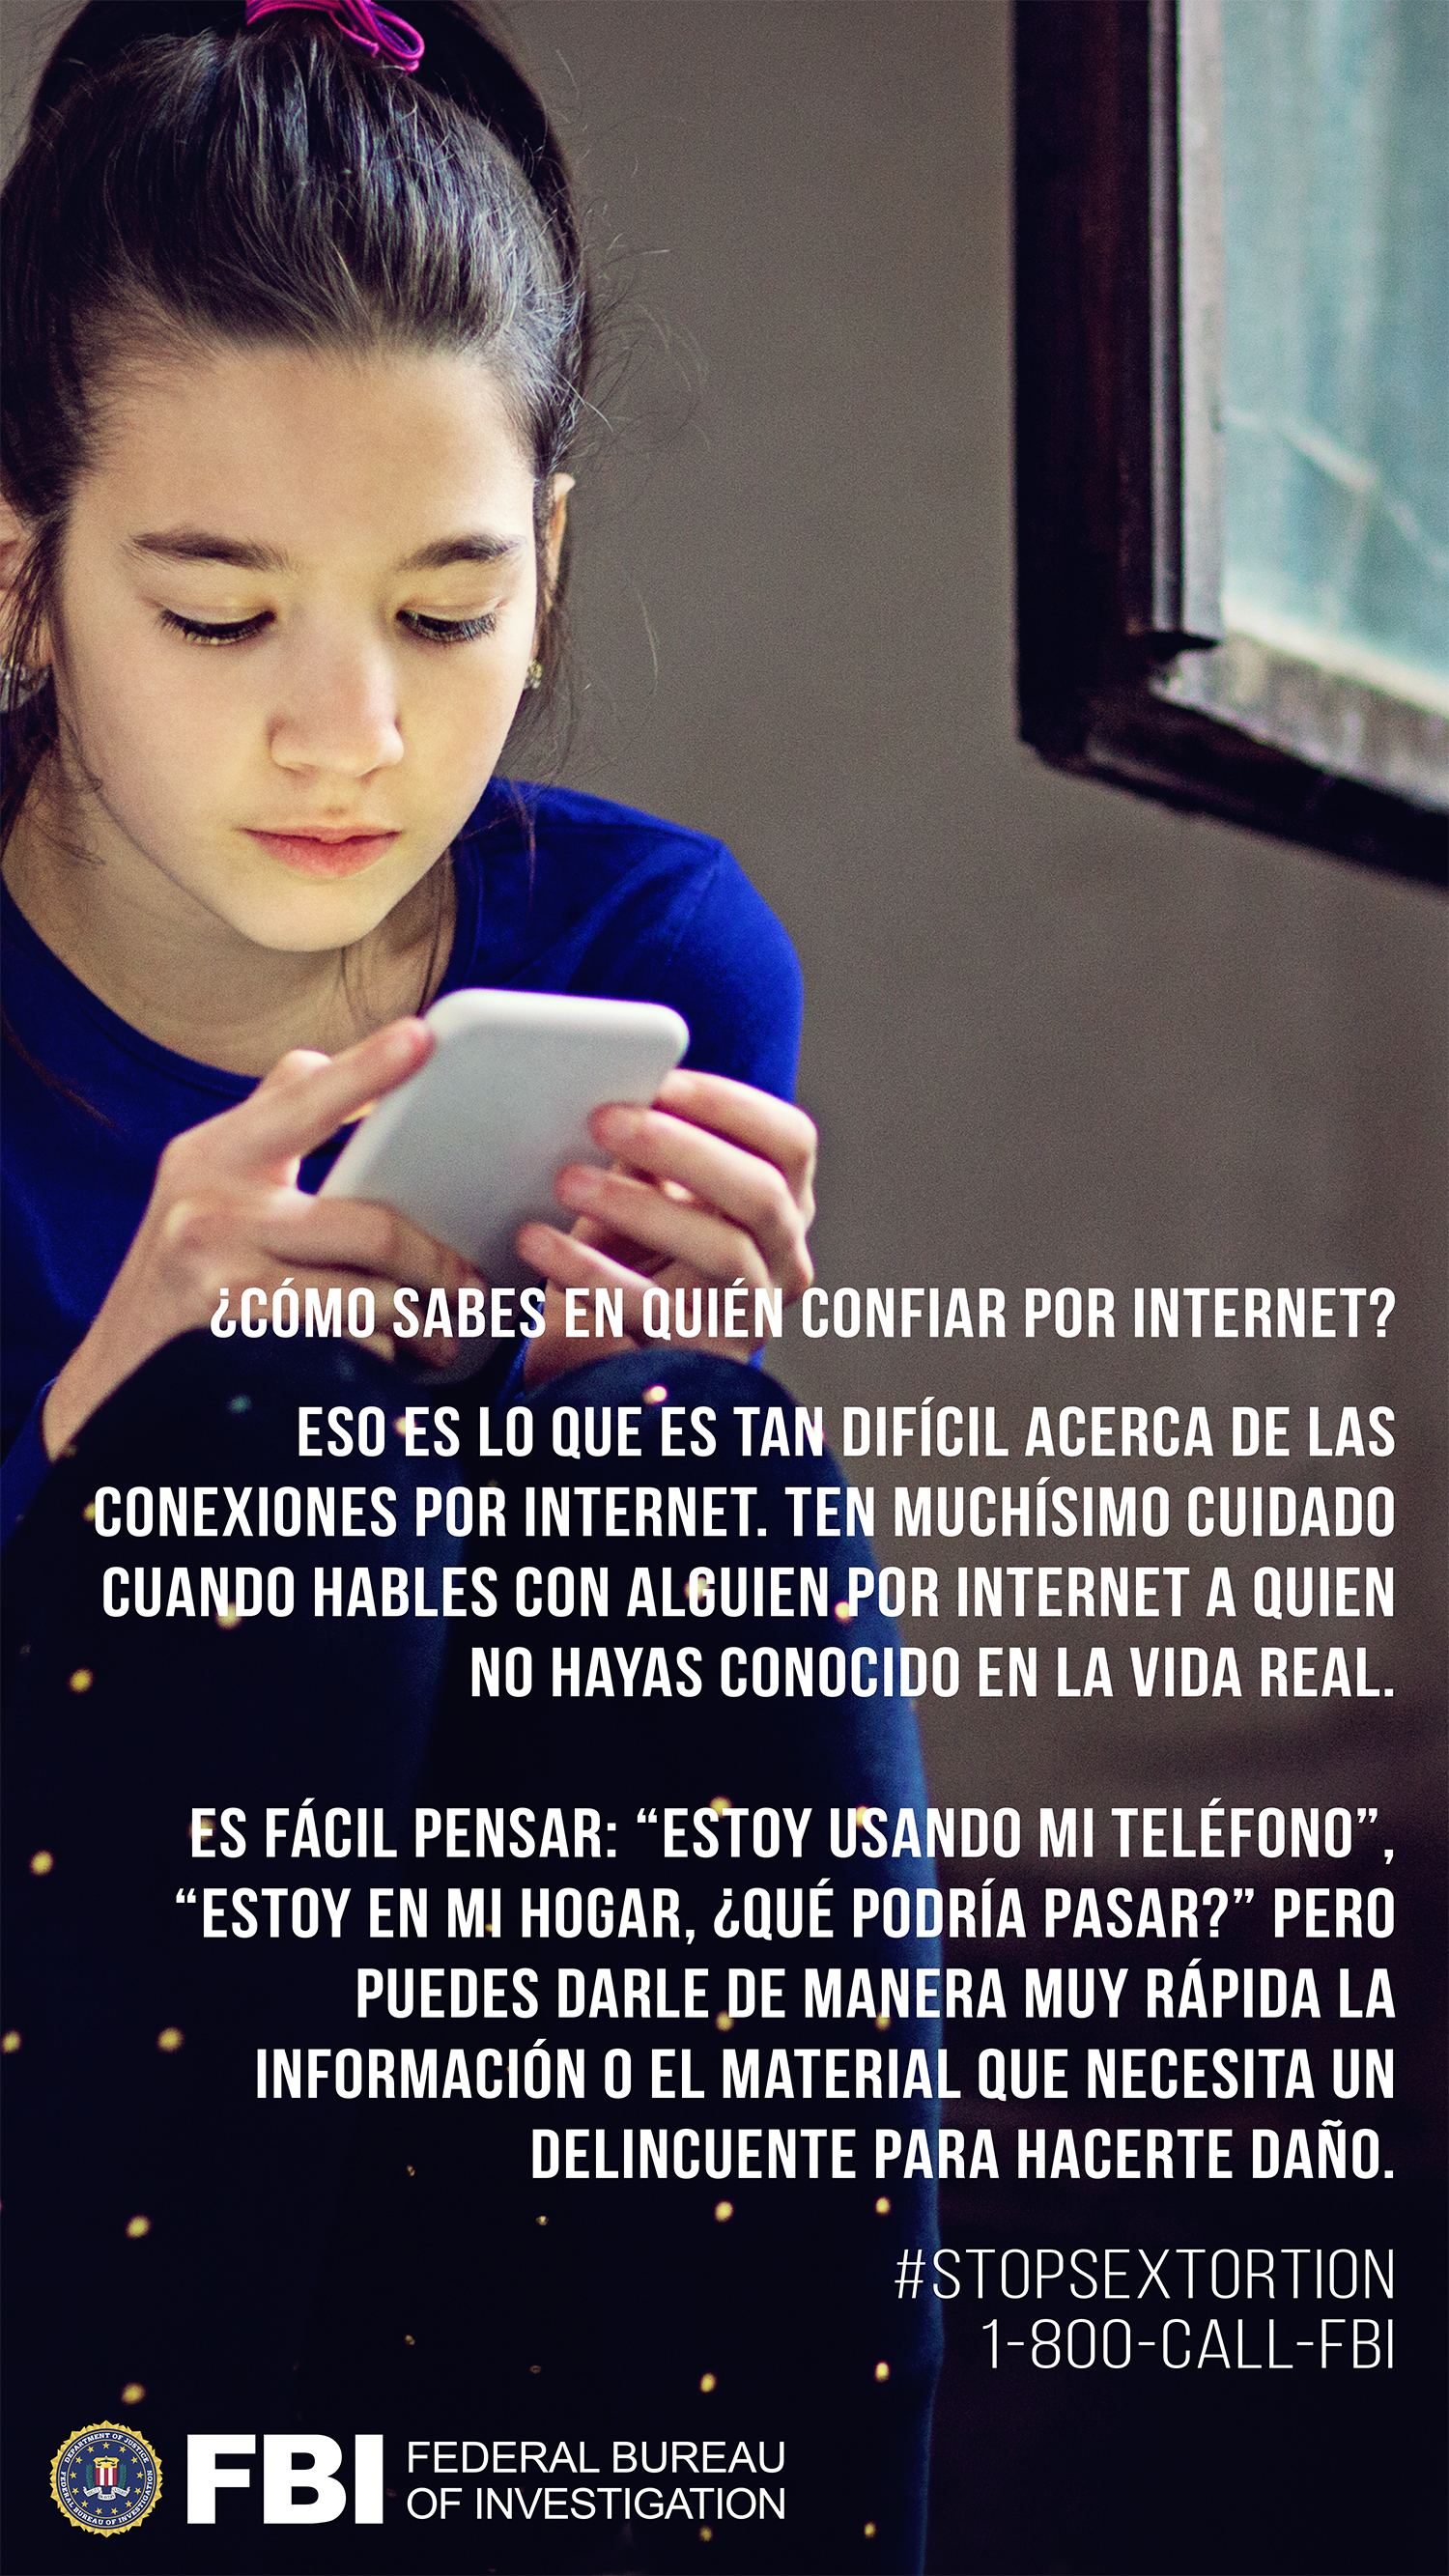 Sextortion Q&A: Who Can Be Trusted Online? (Spanish)